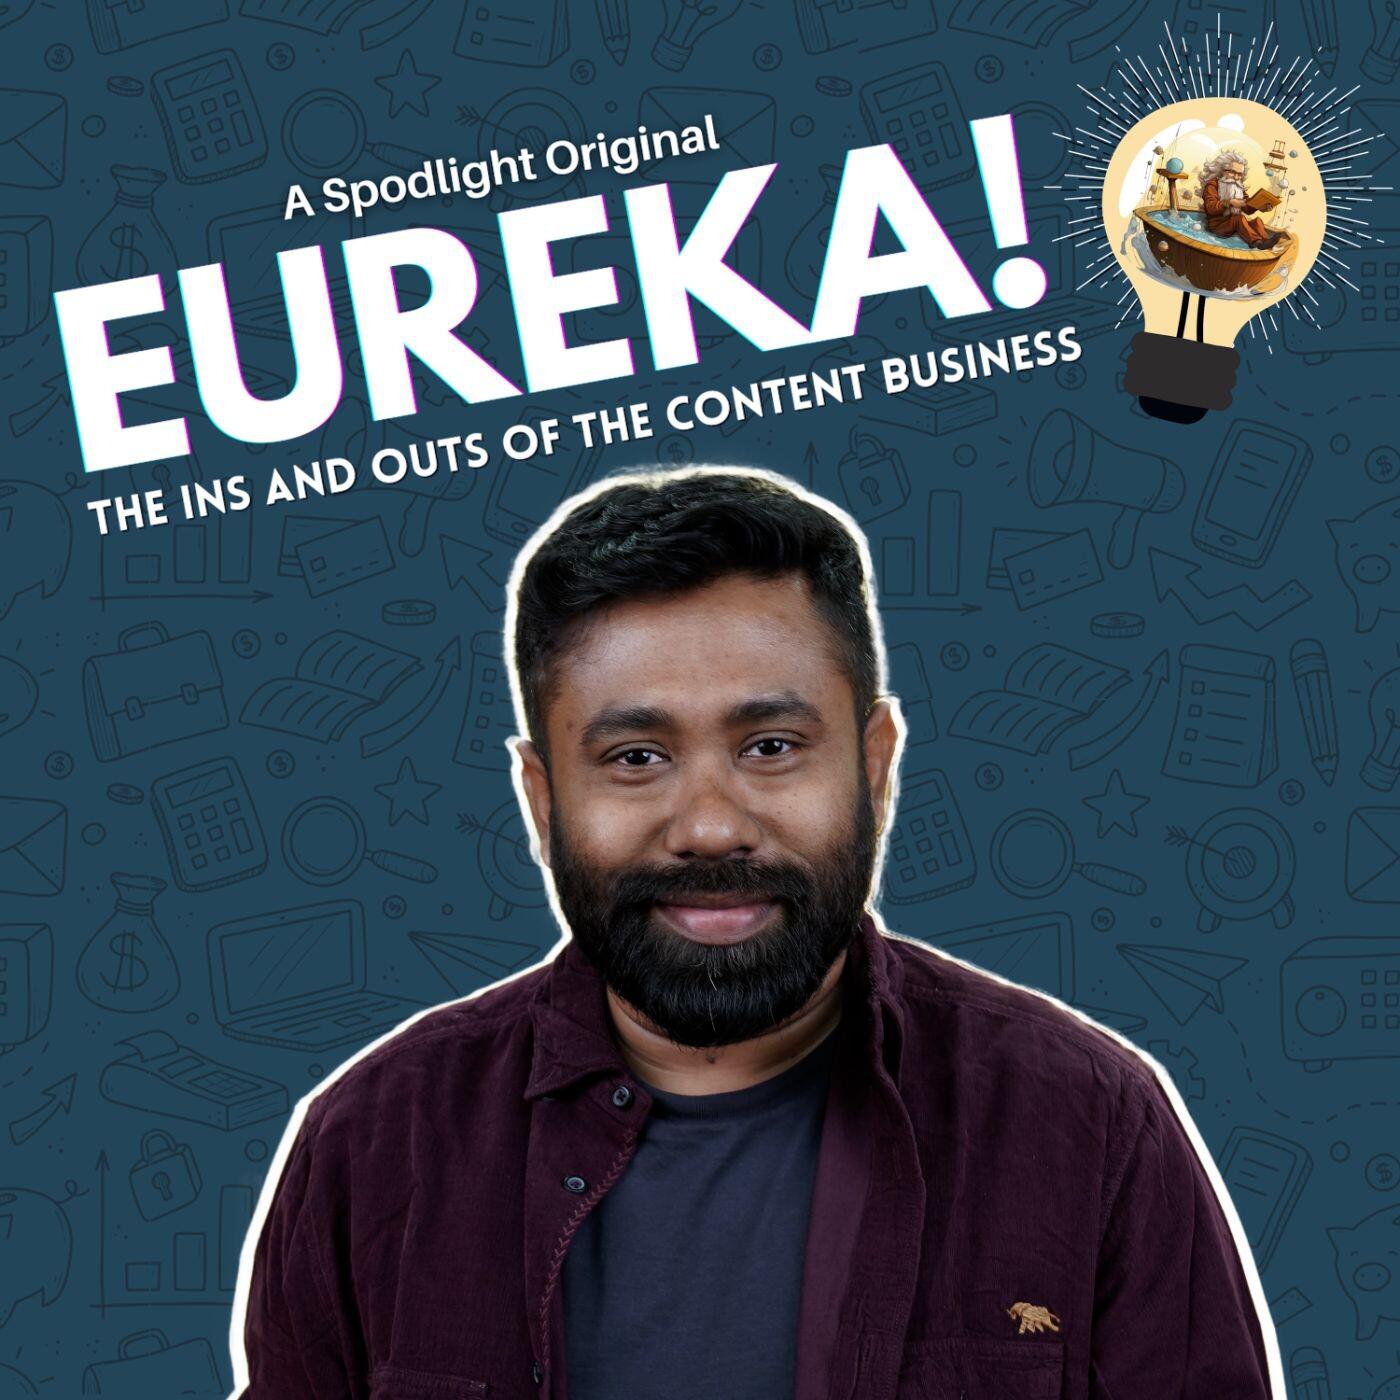 Eureka- The Ins and Outs of the Content Business